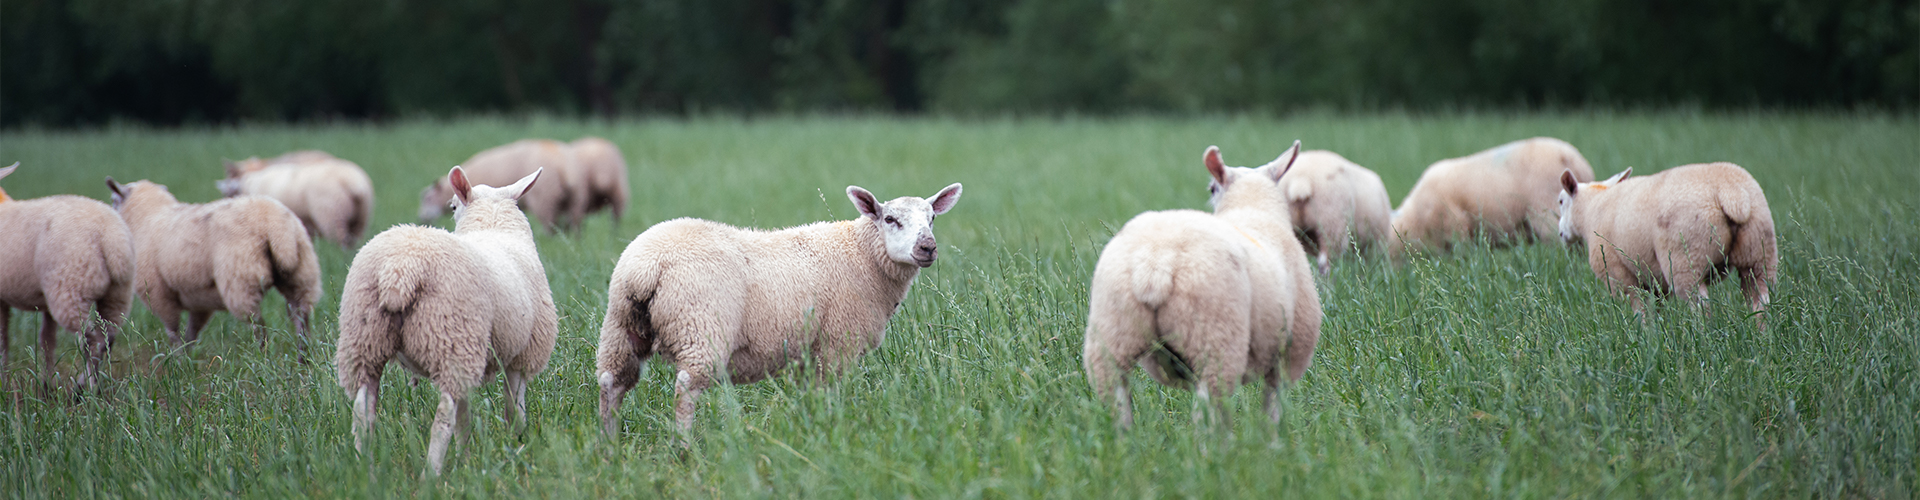 Maximising returns from store lamb production: diet advice and the role of Actisaf live yeast